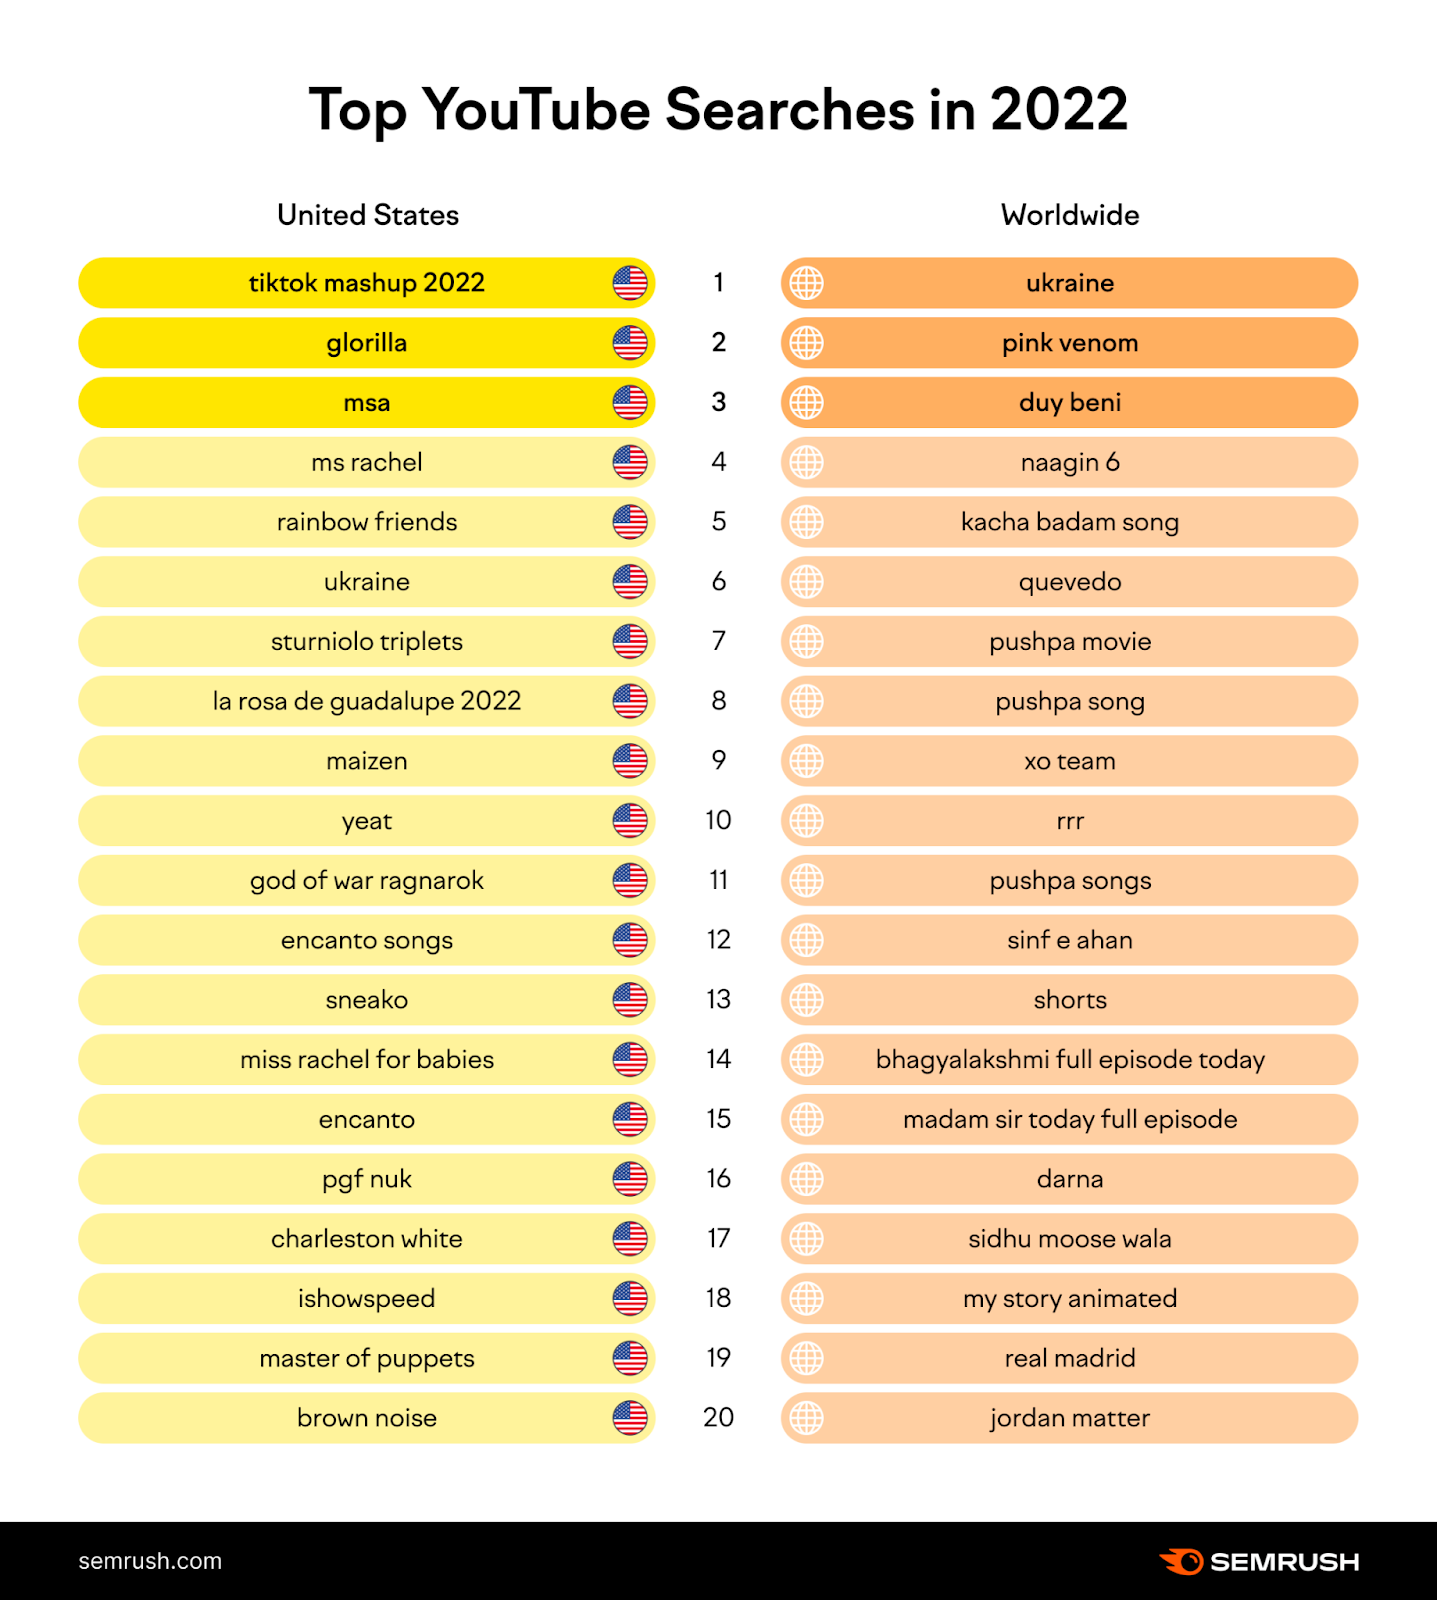 an image showing 20 top YouTube searches in 2022 in the US and worldwide